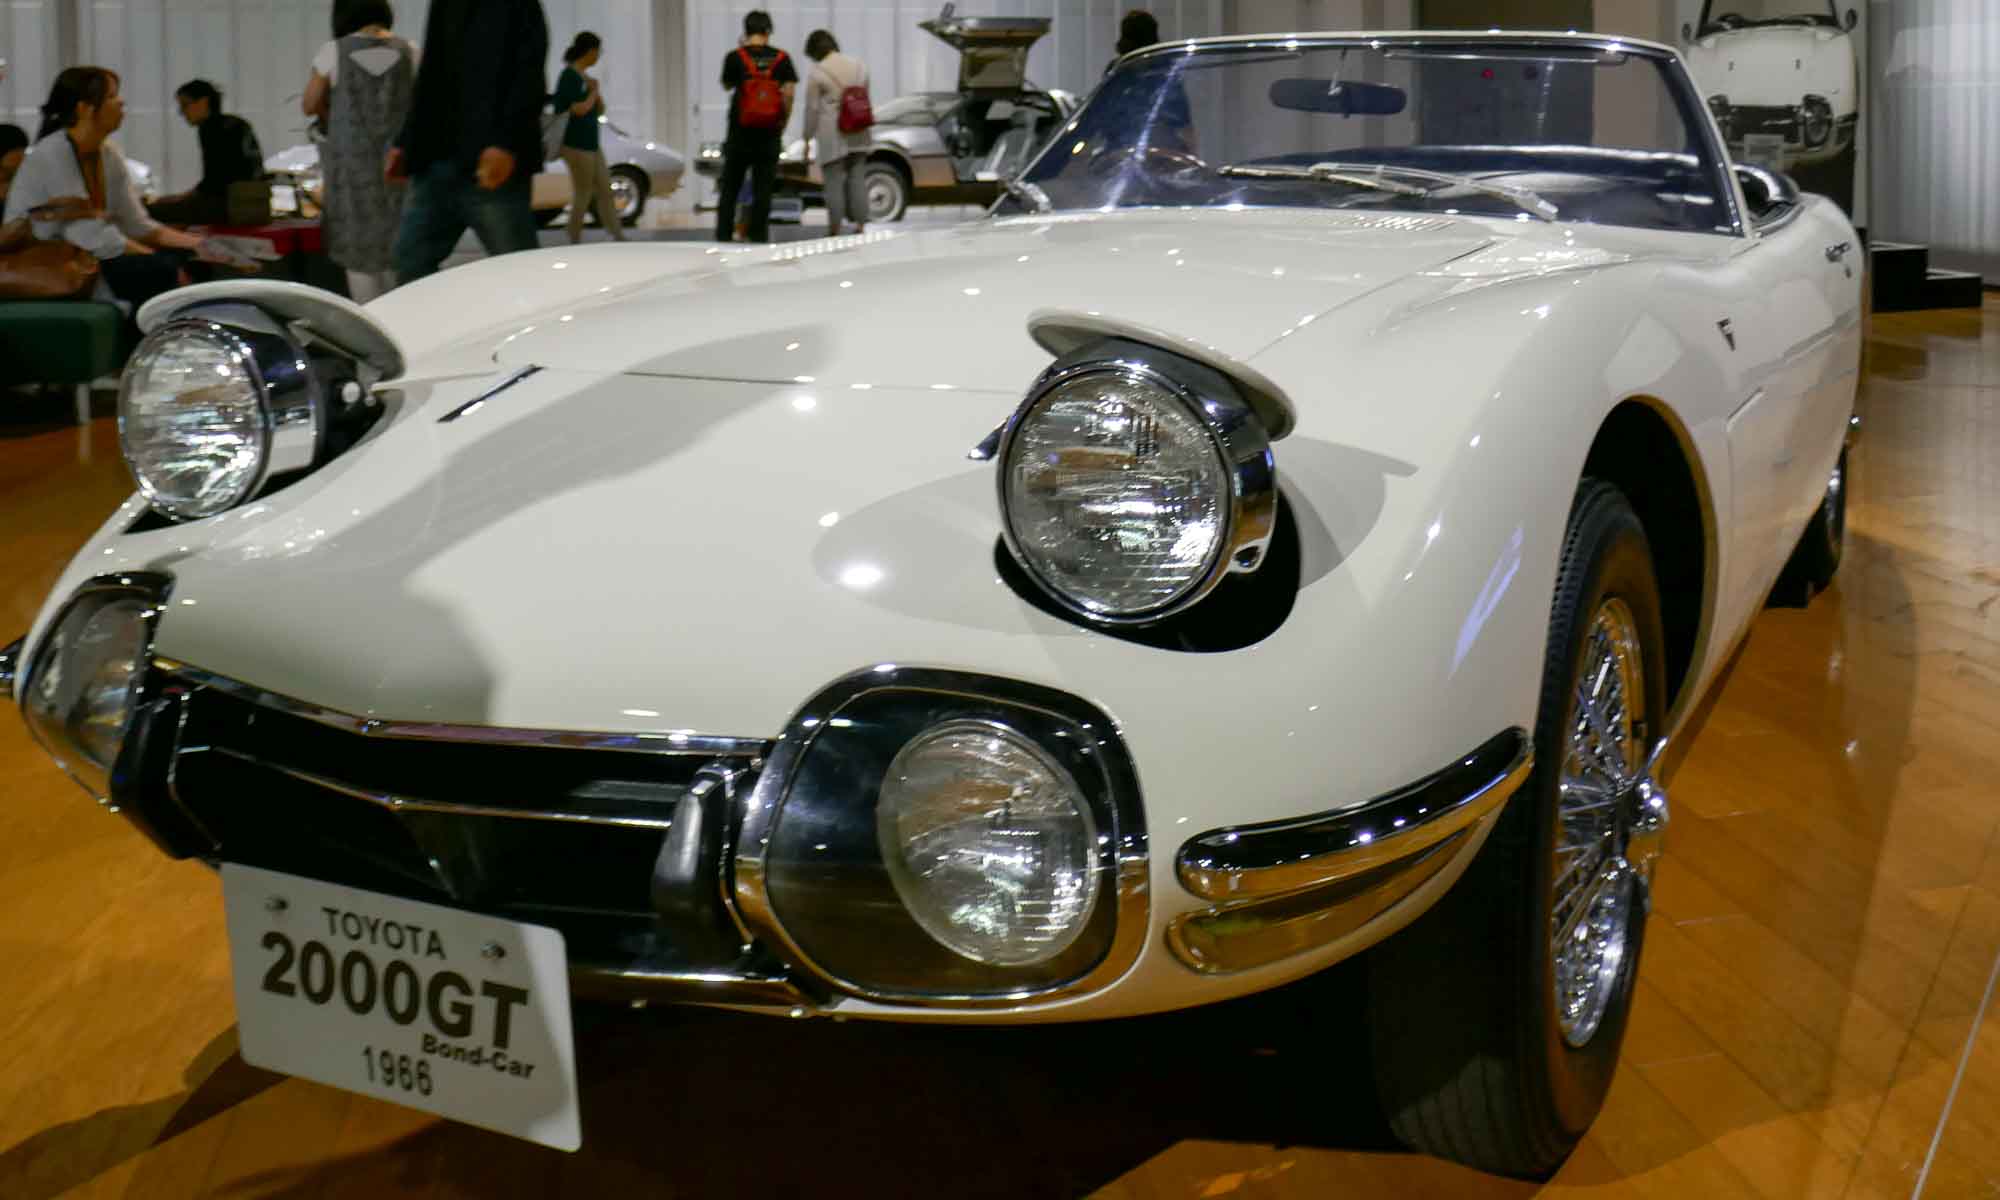 There was a special exhibition with several Toyota 2000 GT and a DeLorean